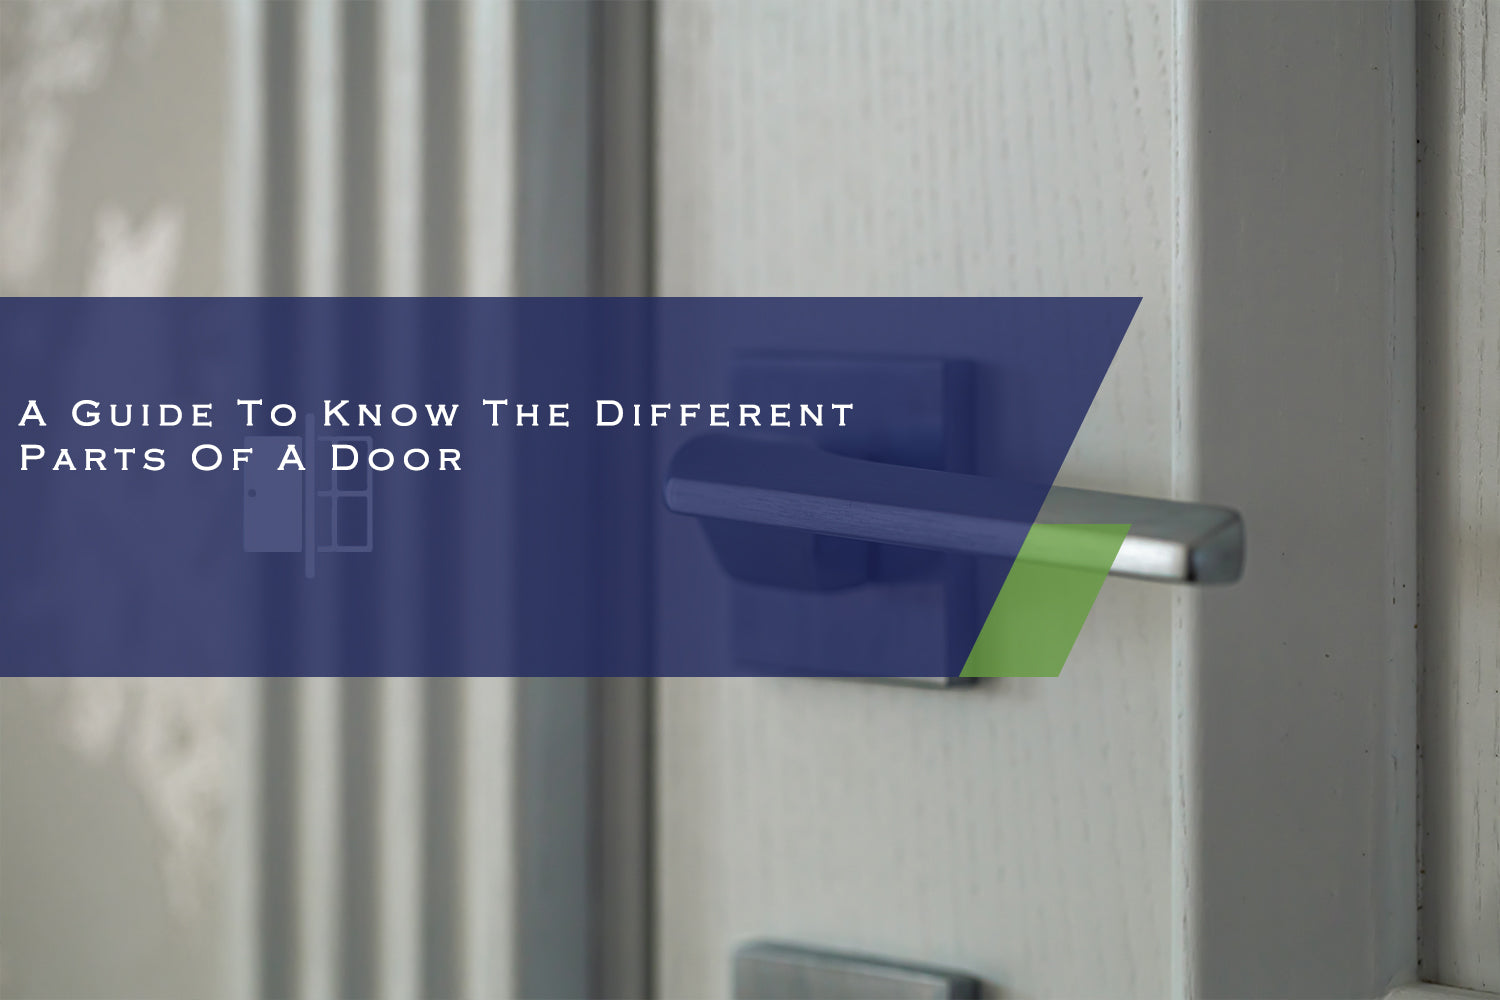 A Guide To Know The Different Parts Of A Door